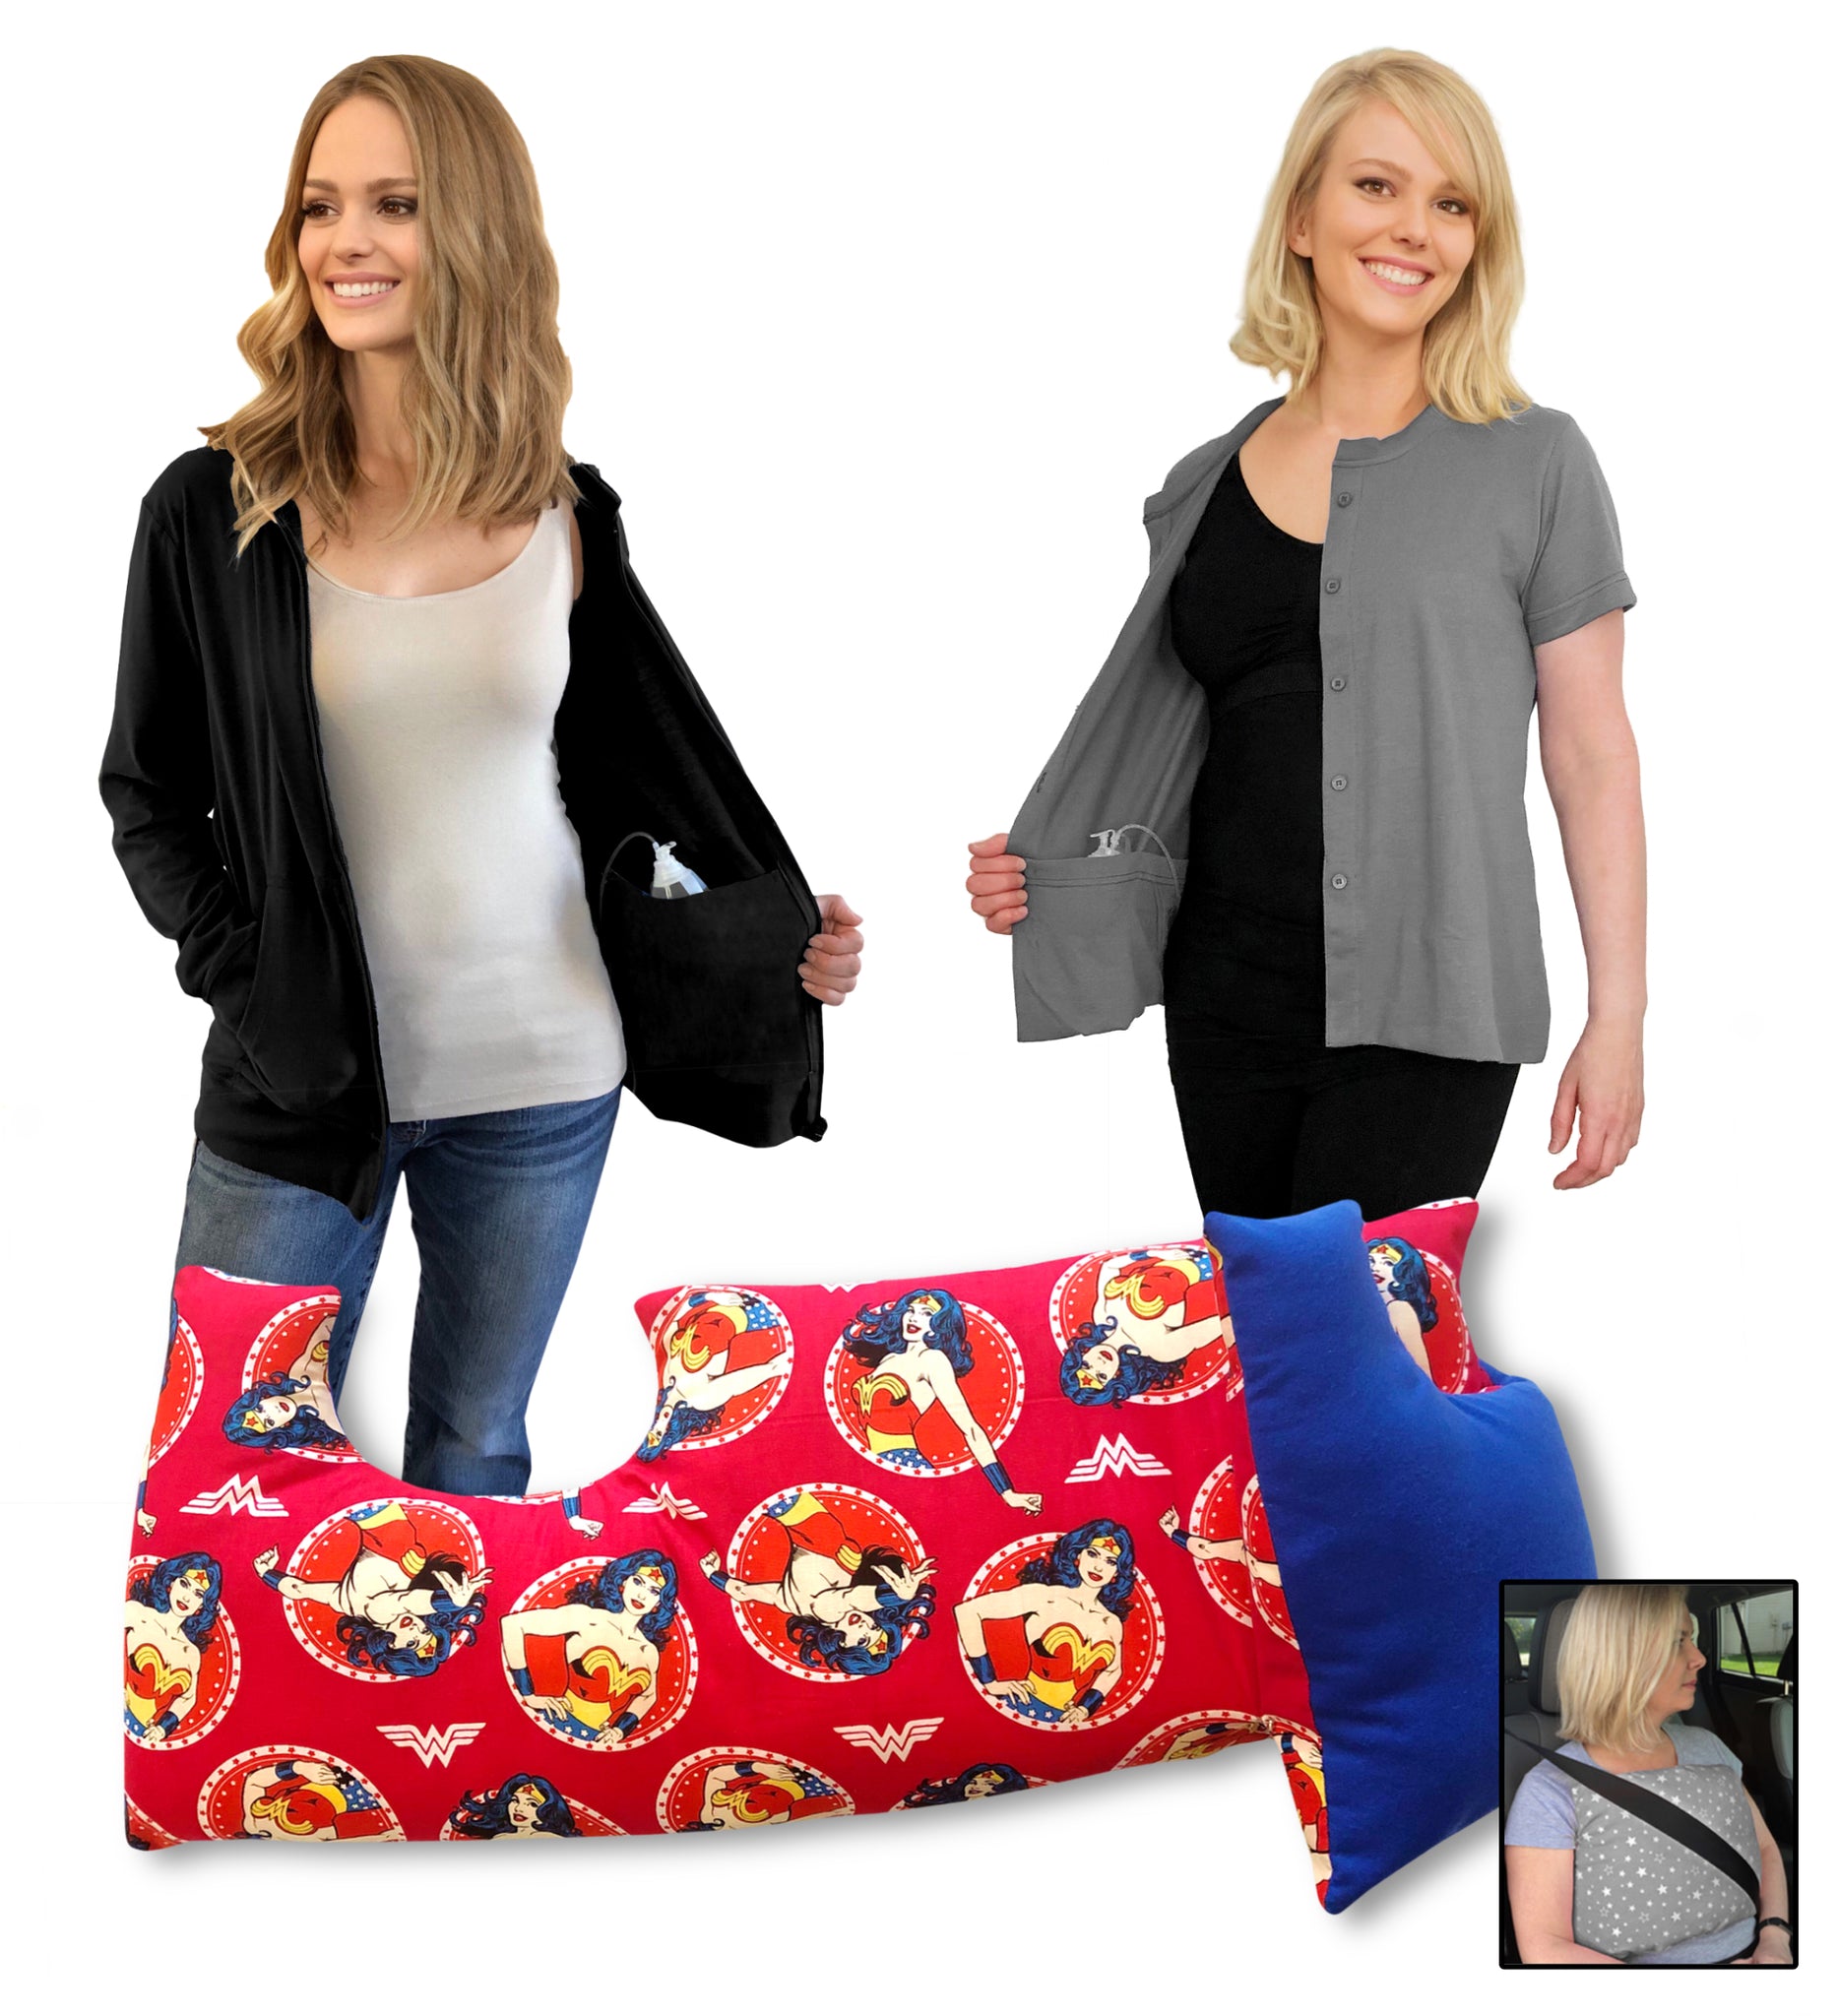 3 Pack MASTECTOMY Kit Must Have SHIRT and Chest PILLOW (pw,T1,Hb) 3+ discount included!